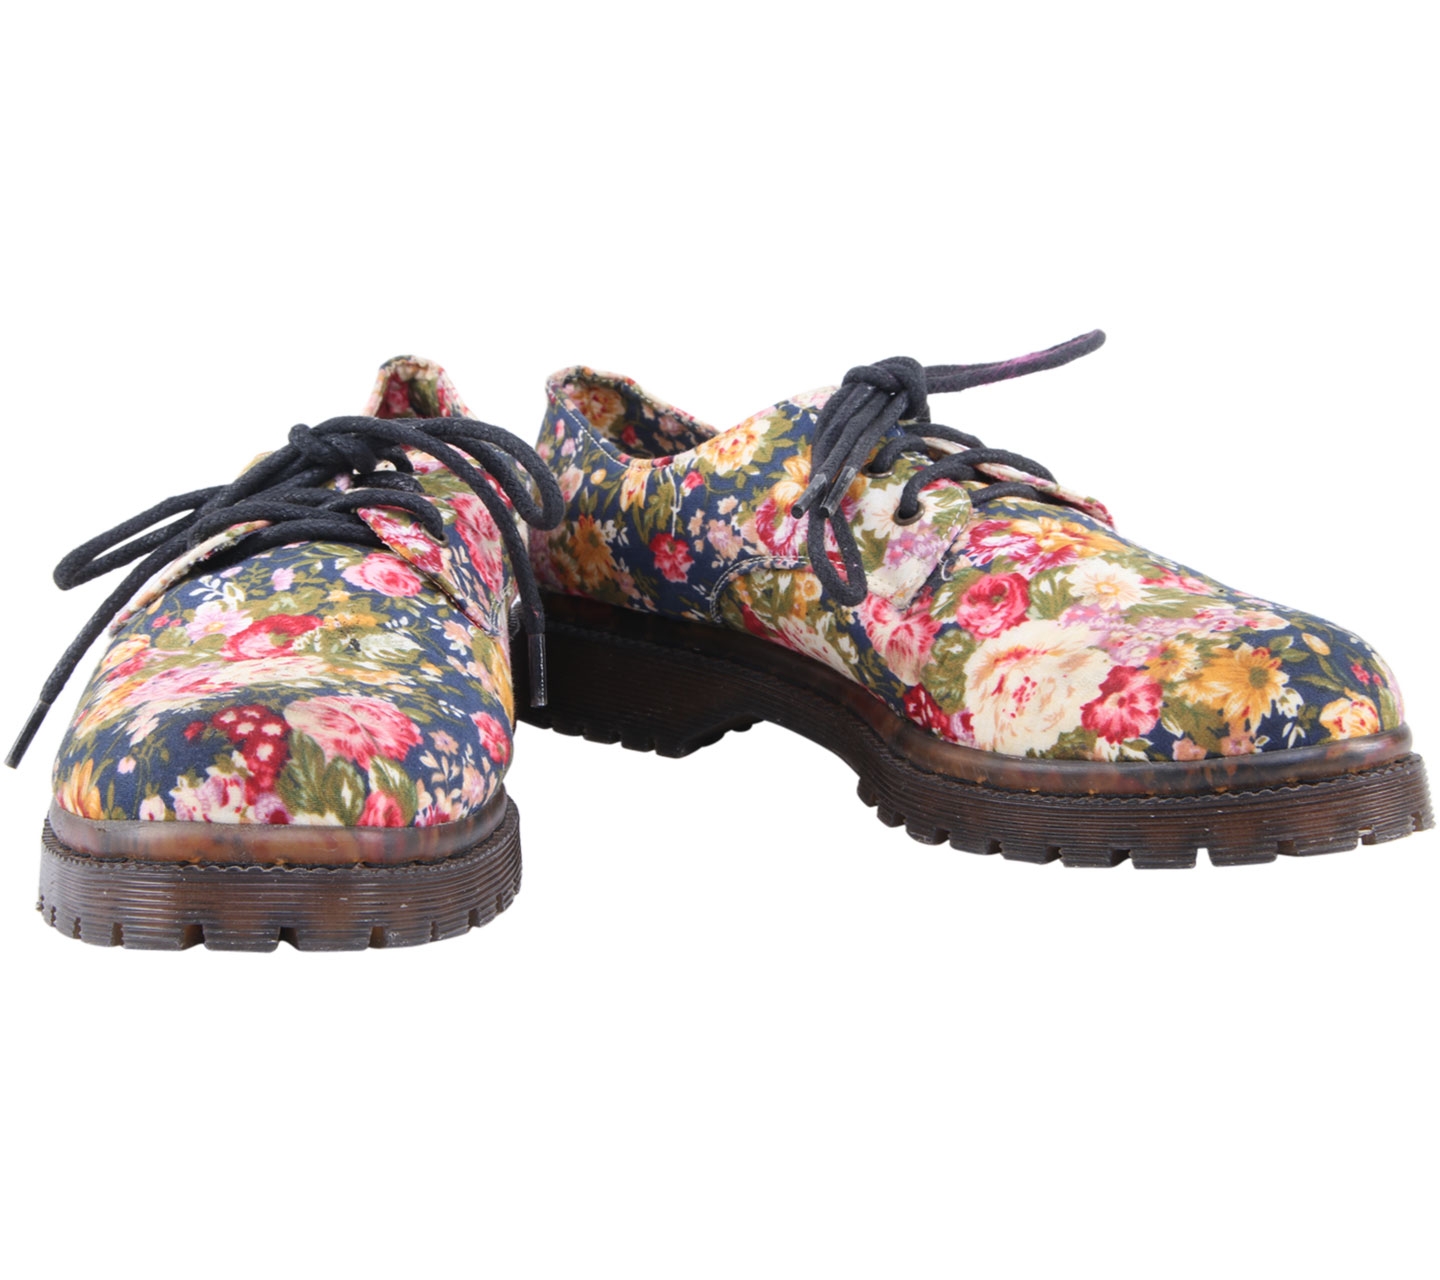 MKS' Multi Color Floral Sneakers